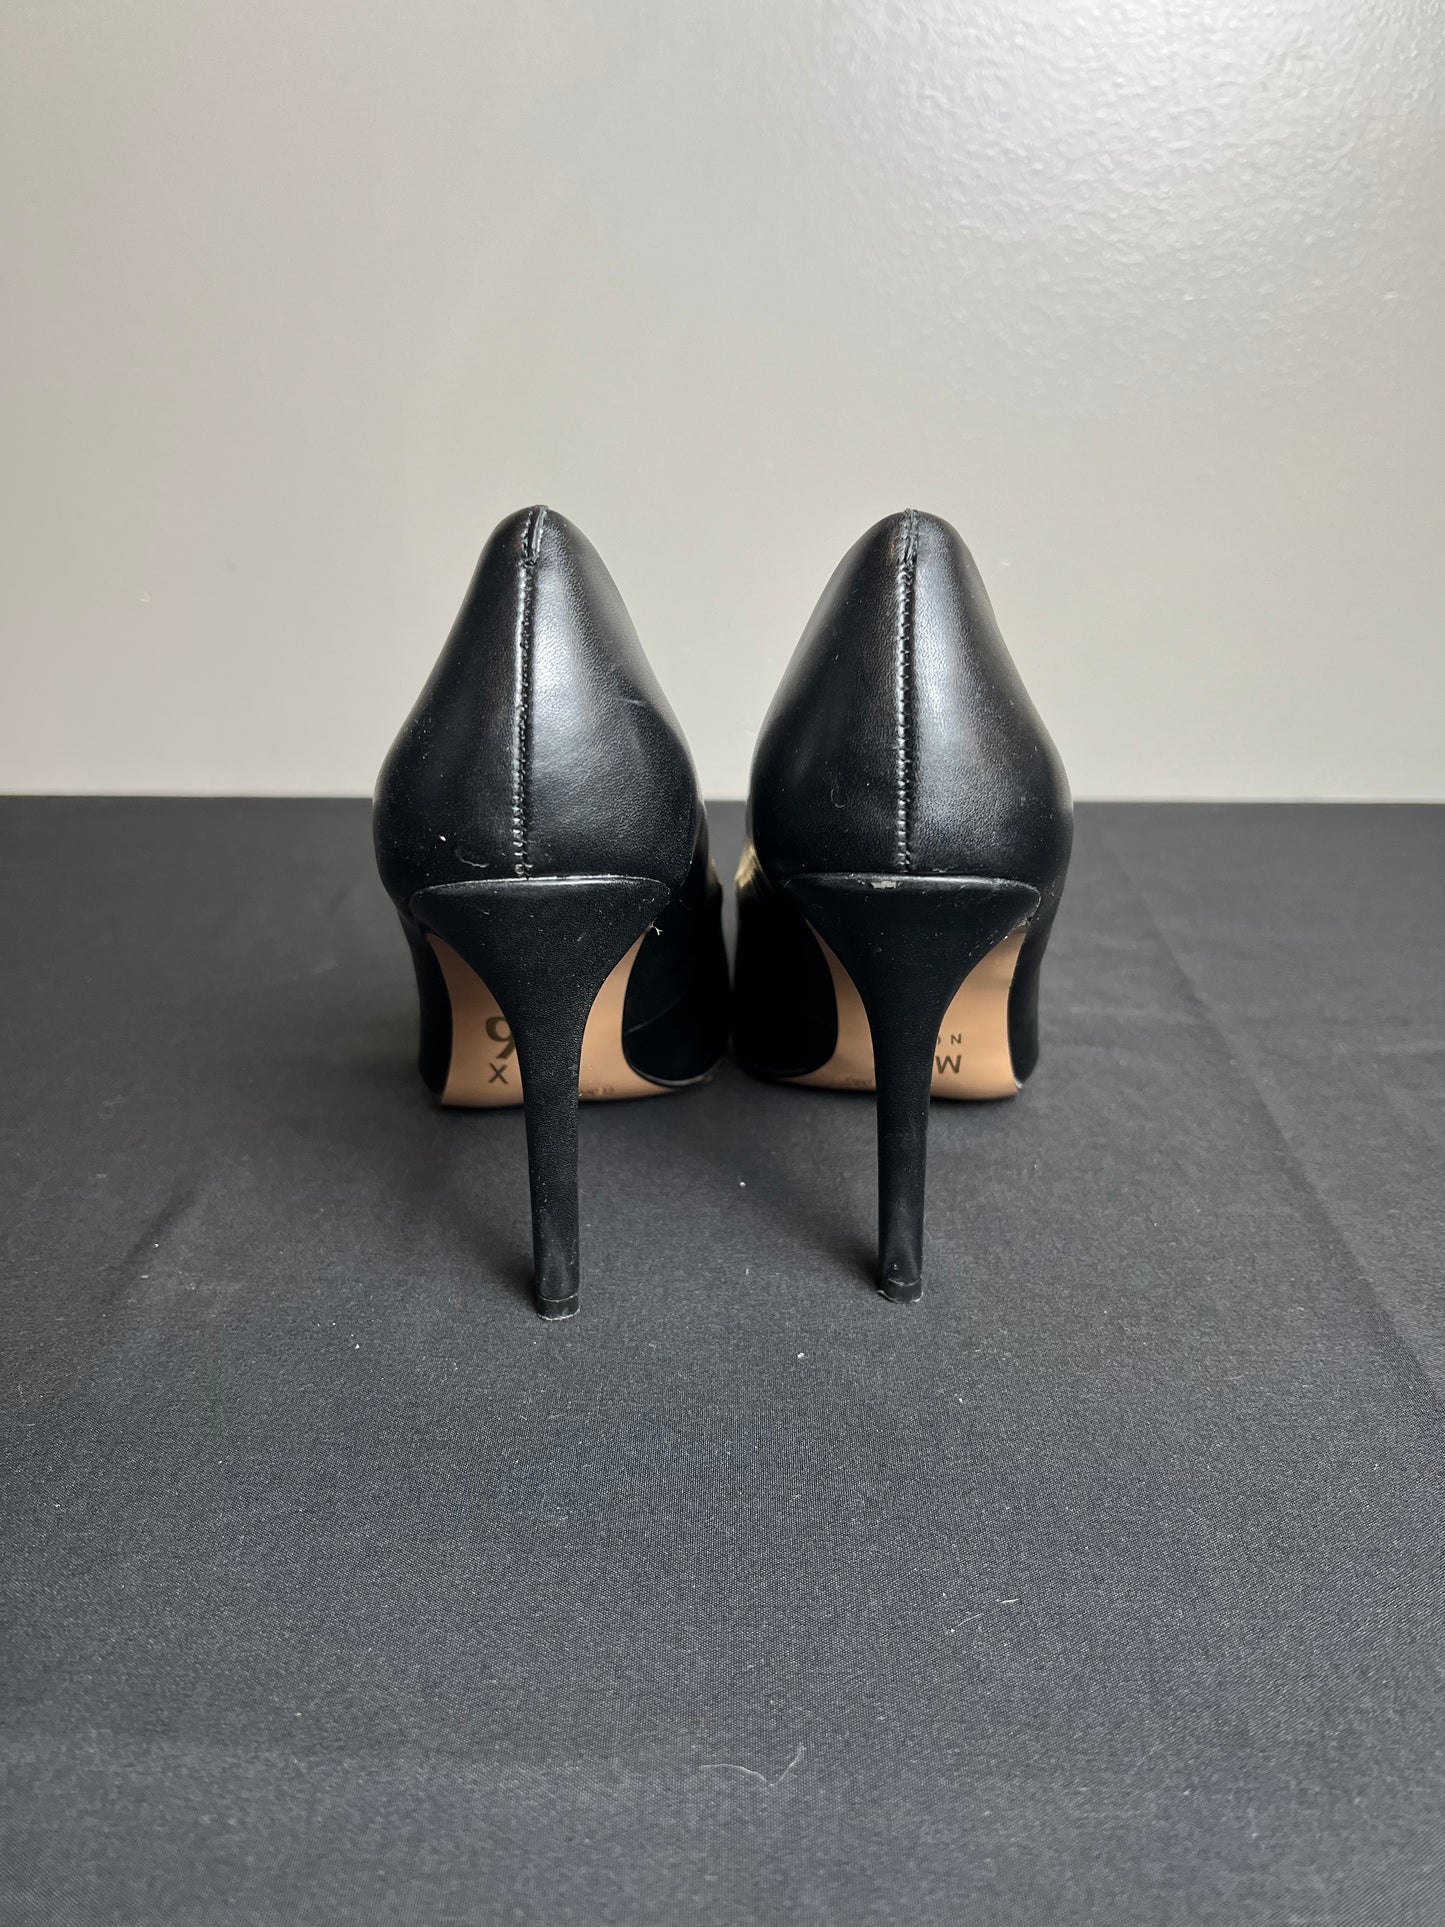 Shoes Heels Stiletto By Mix No 6  Size: 6